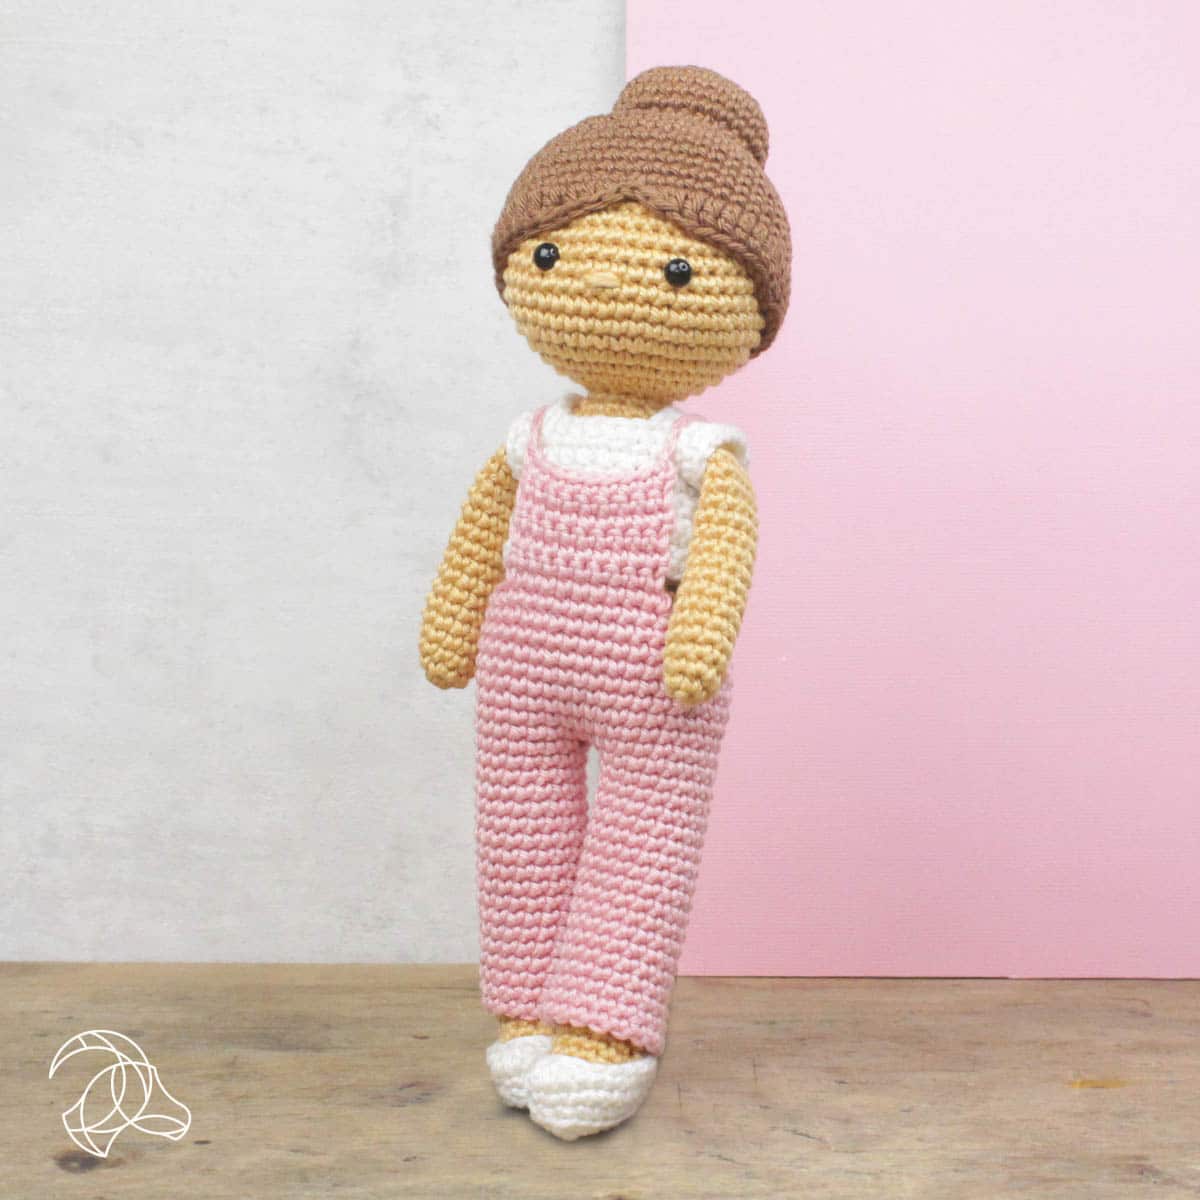 Little Girl in Pink Dungarees - Doll Crochet Kit - by Hardicraft